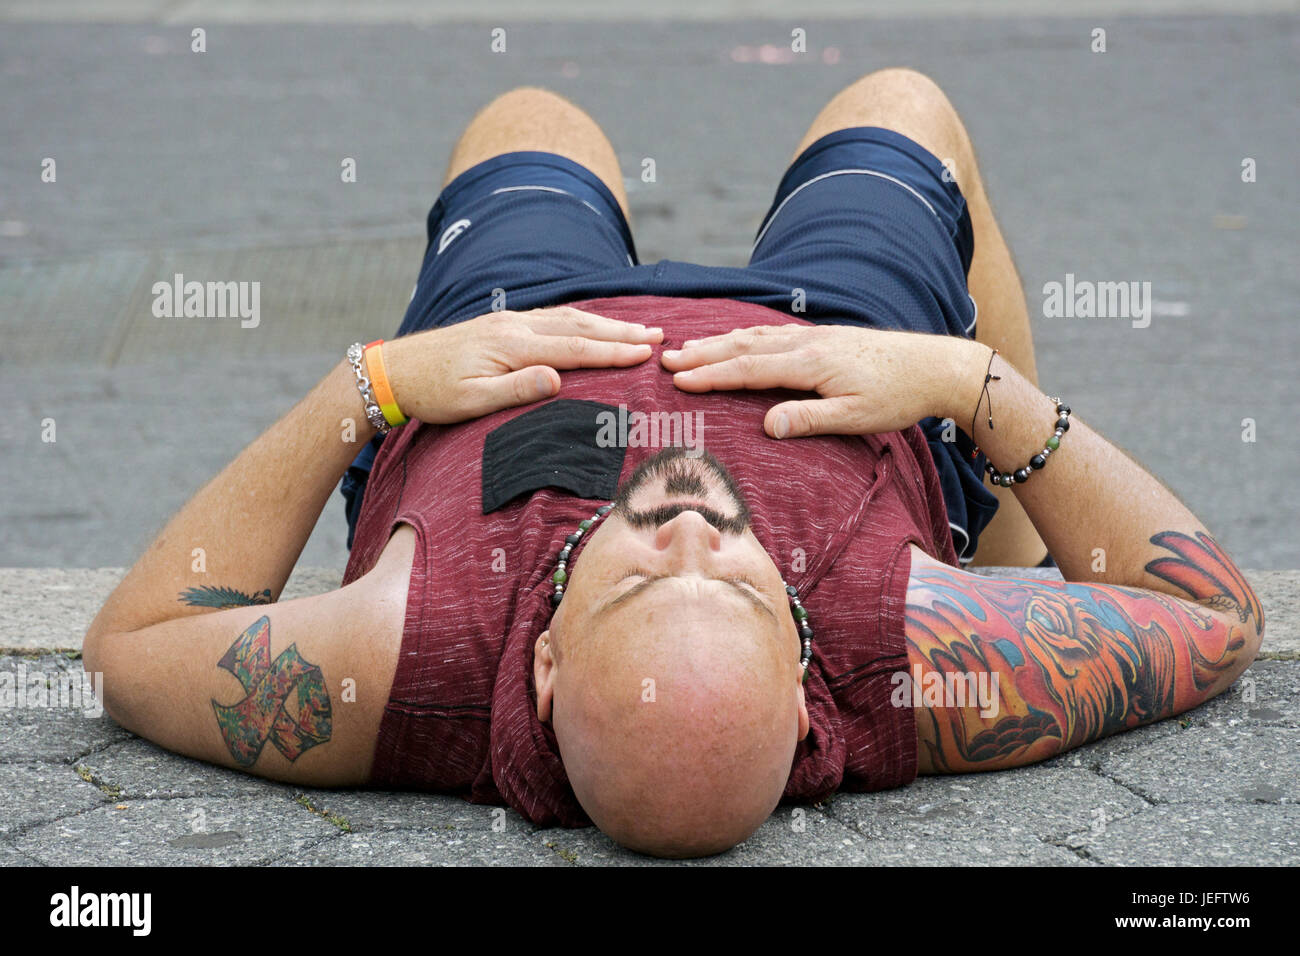 Photo of a resting man with tattoos wearing a tank top photographed from an unusual angle. Stock Photo